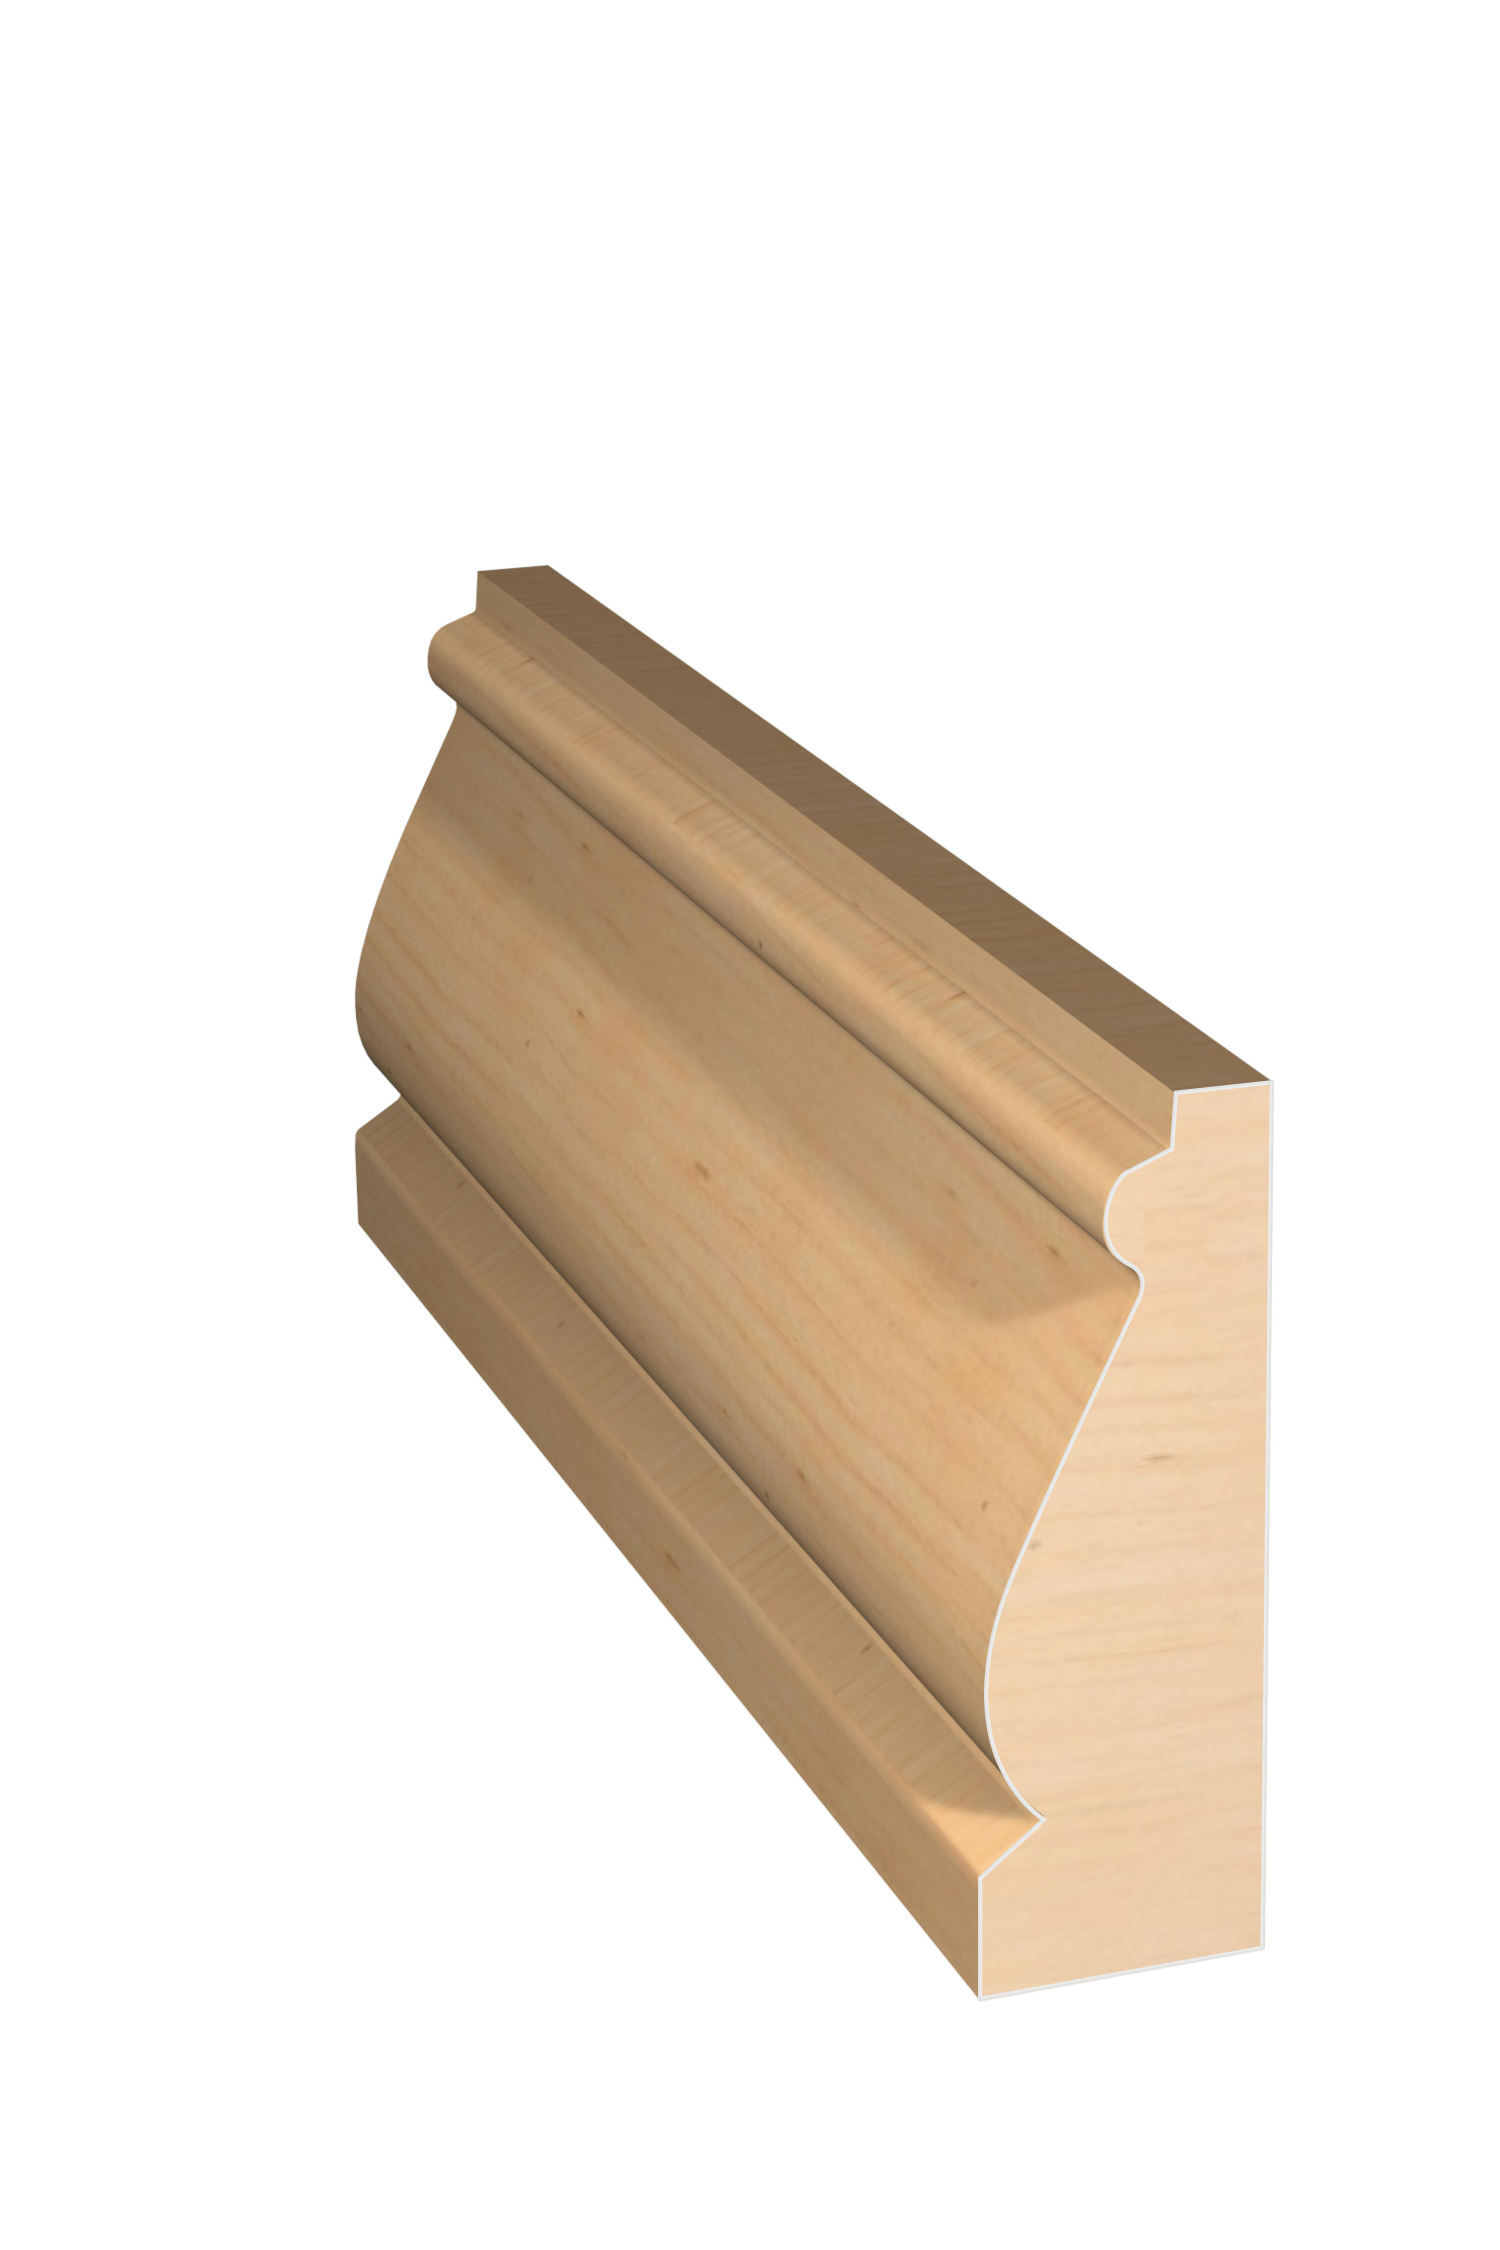 Three dimensional rendering of custom casing wood molding CAPL21412 made by Public Lumber Company in Detroit.